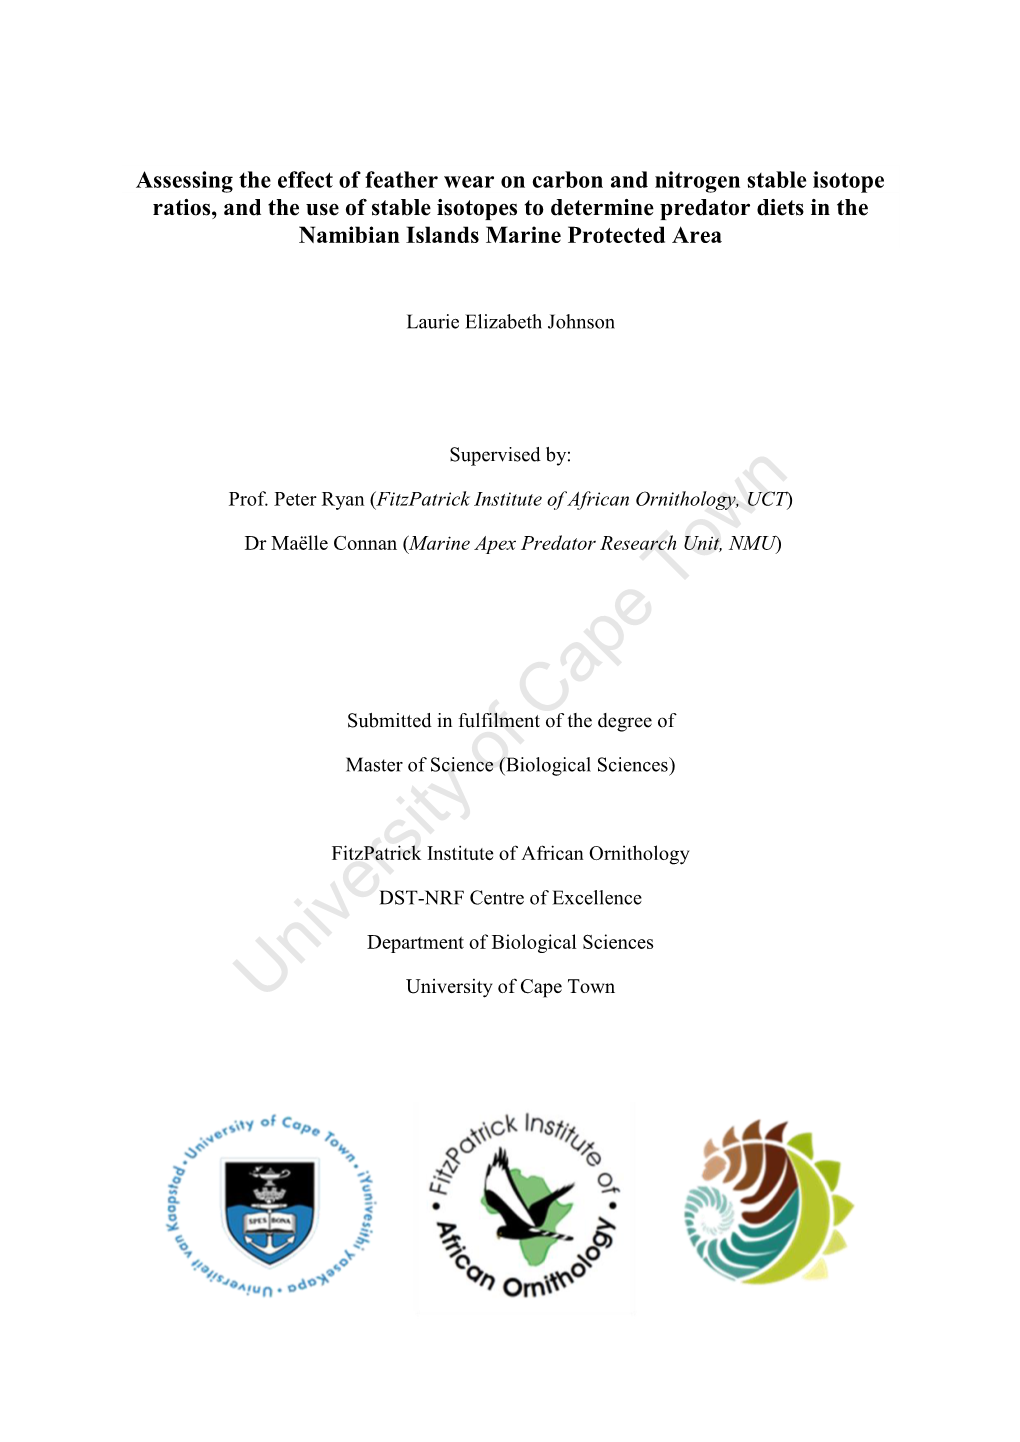 Thesis Sci 2019 Johnson Laurie.Pdf